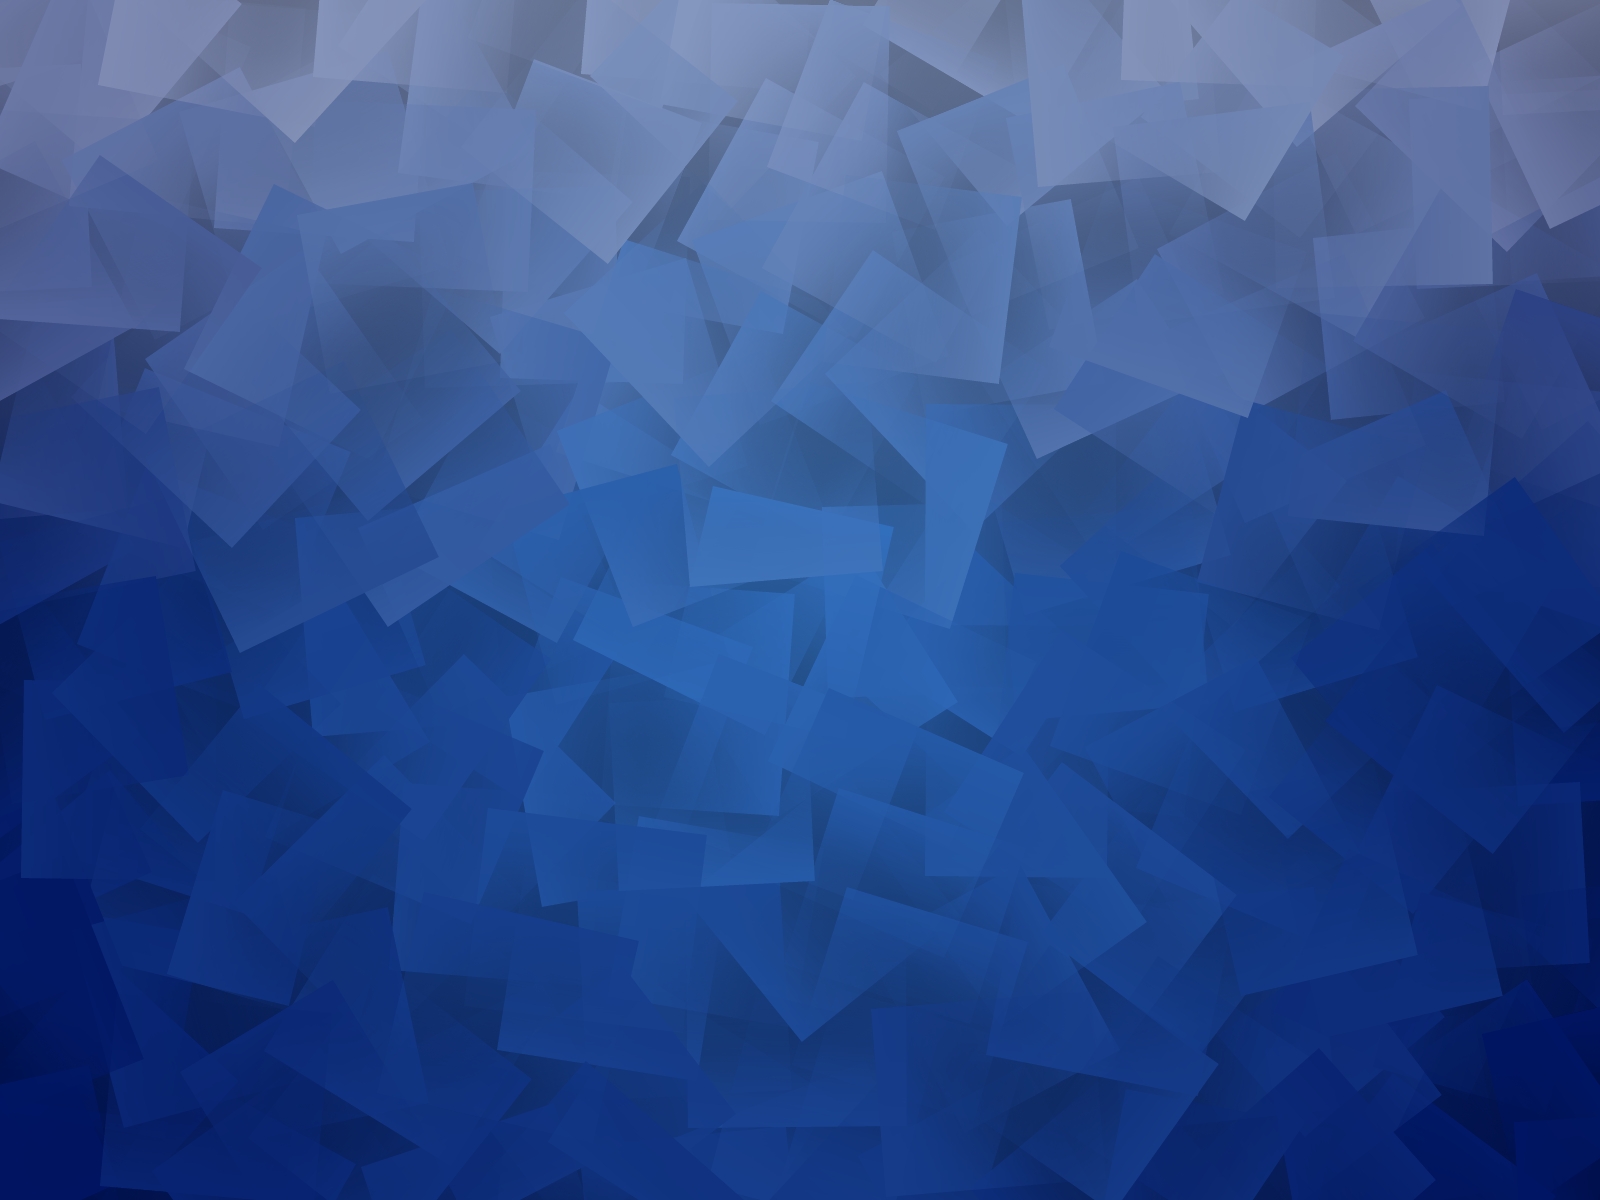 Blue Geometric Modern Download Backgrounds For Powerpoint Templates Ppt Backgrounds